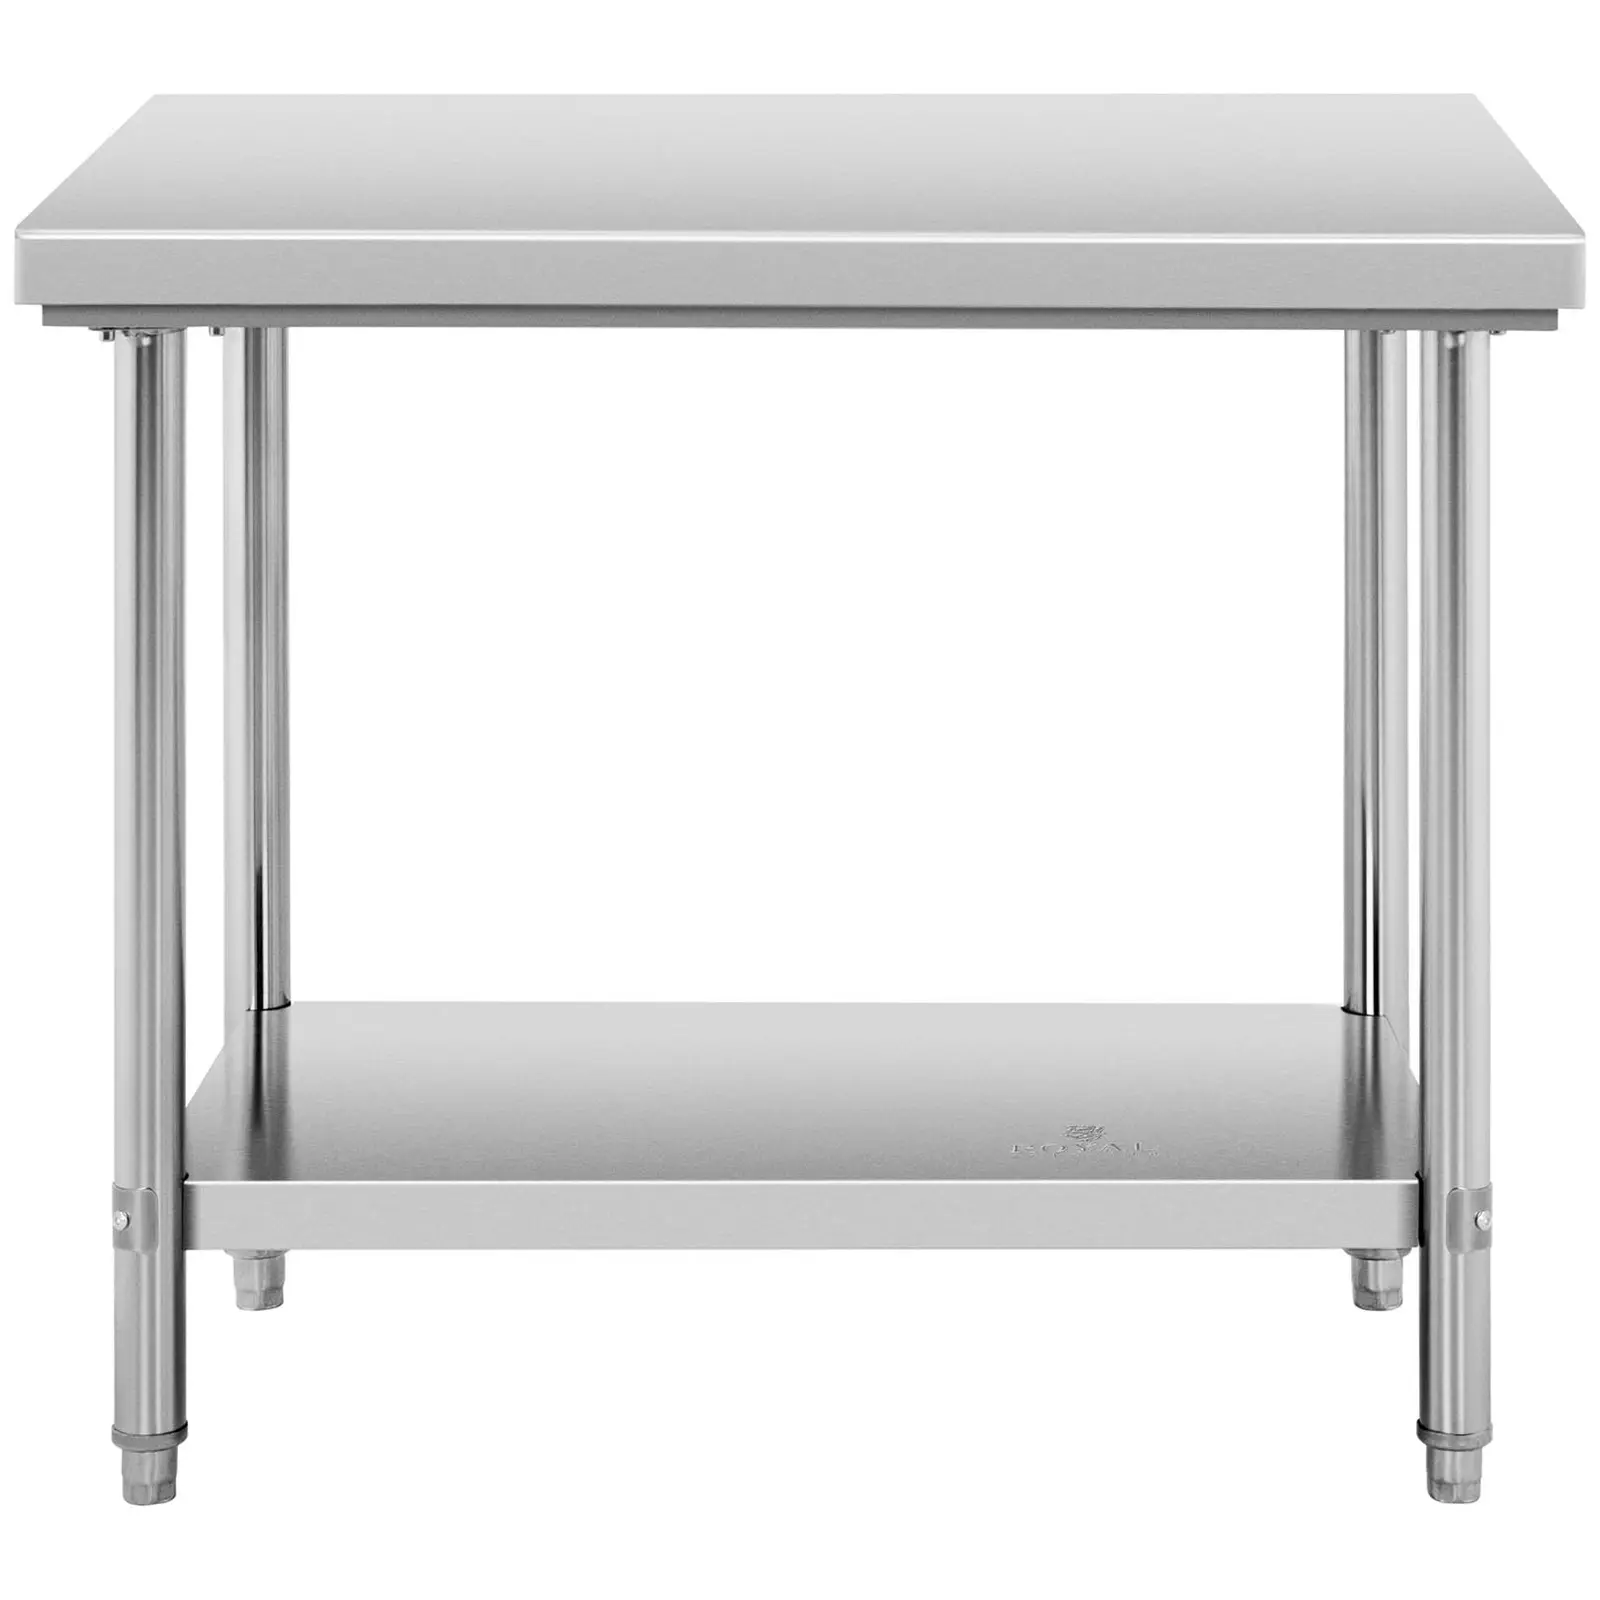 Stainless Steel Work Table - 100 x 70 cm - 190 kg load capacity - Royal Catering